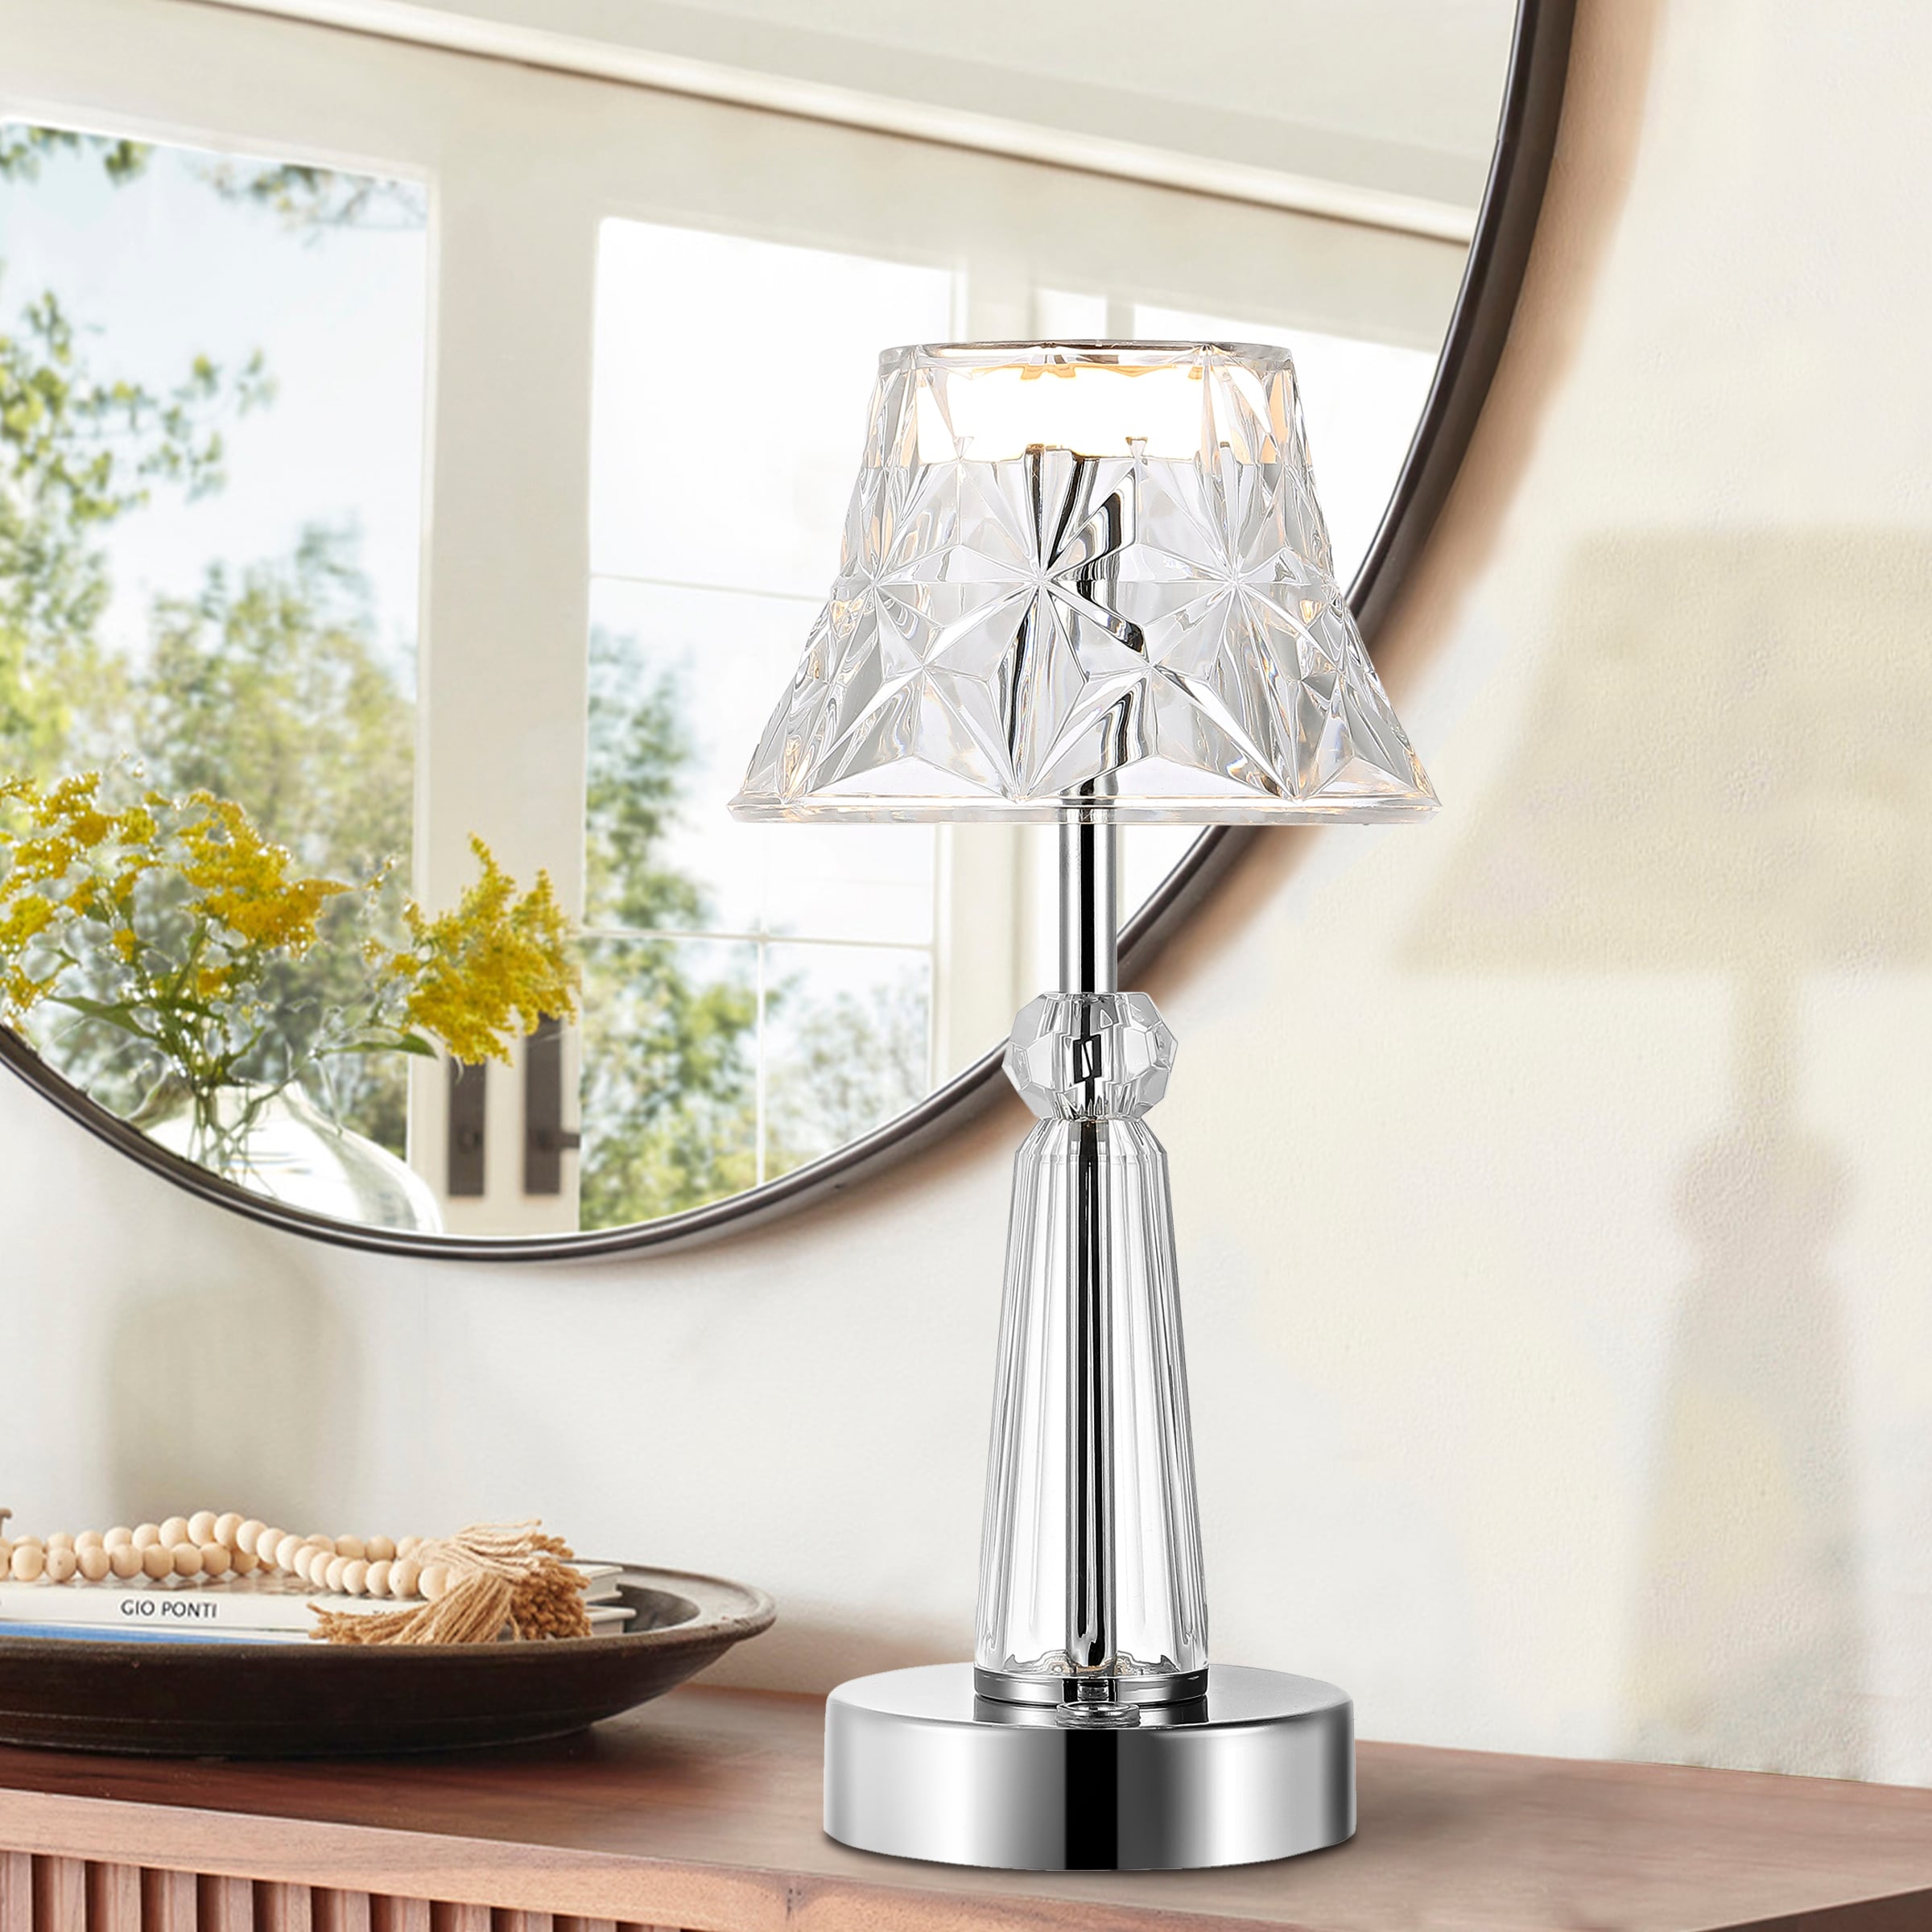 Battery-operated Table Lamps at